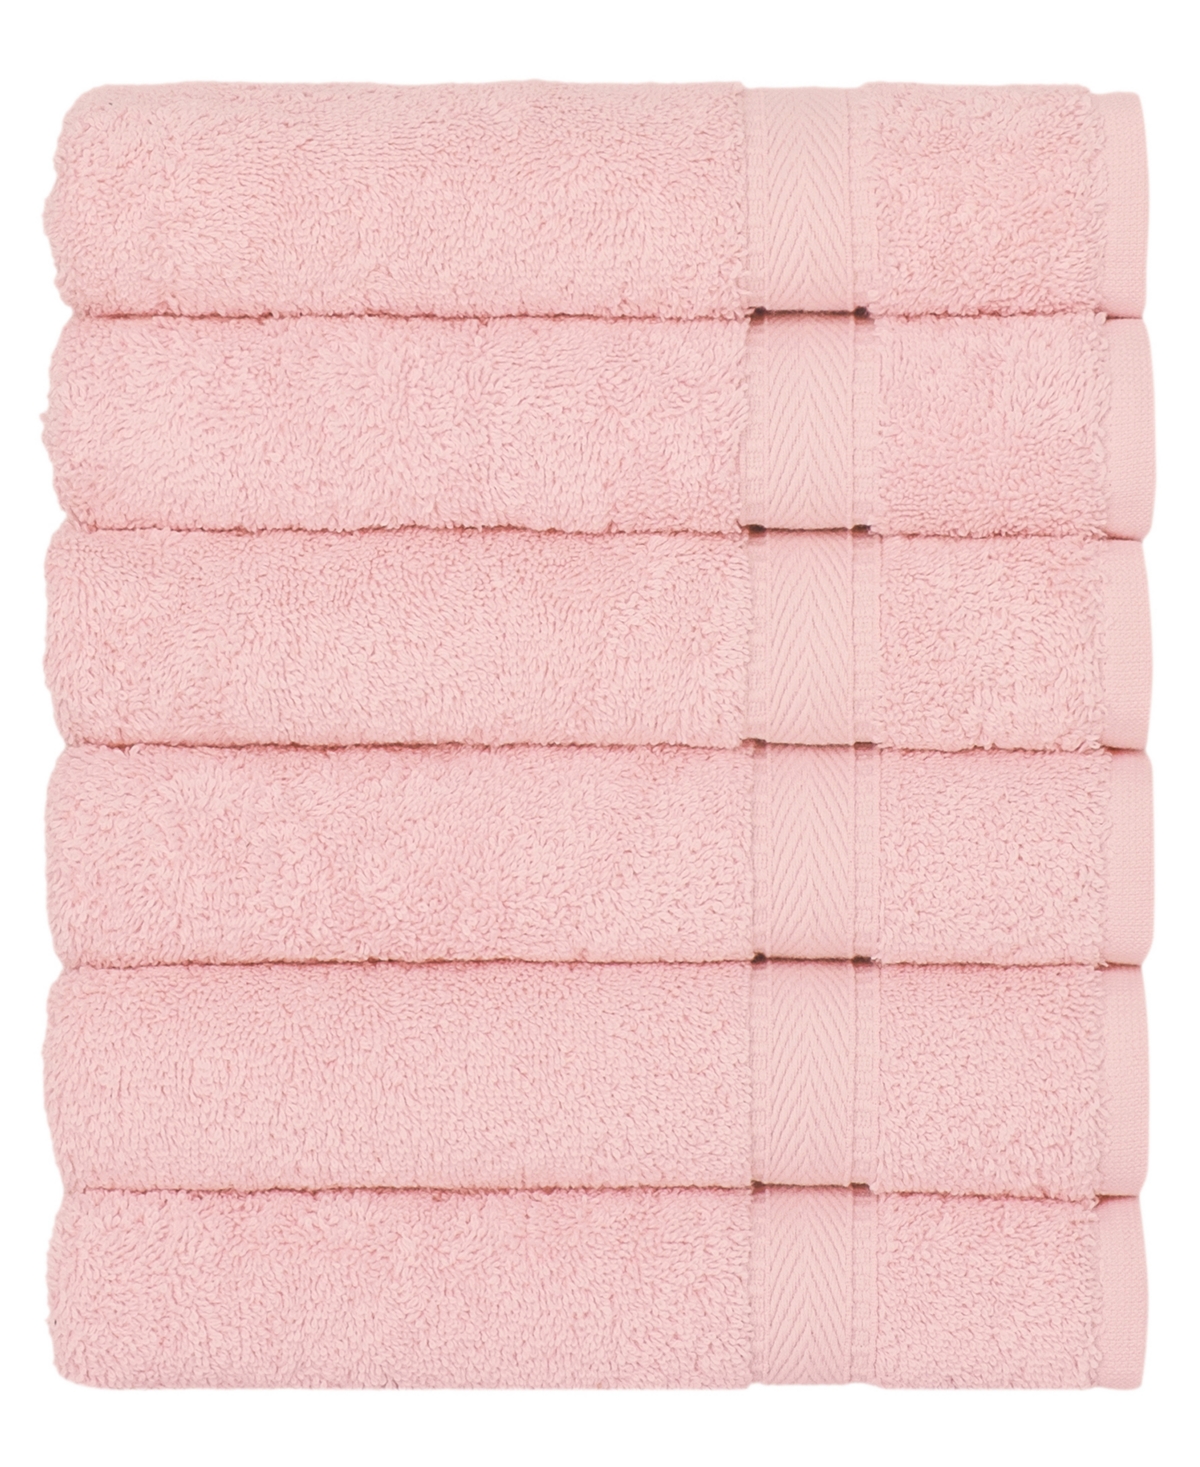 Linum Home Sinemis 6-pc. Terry Hand Towel Set In Pink